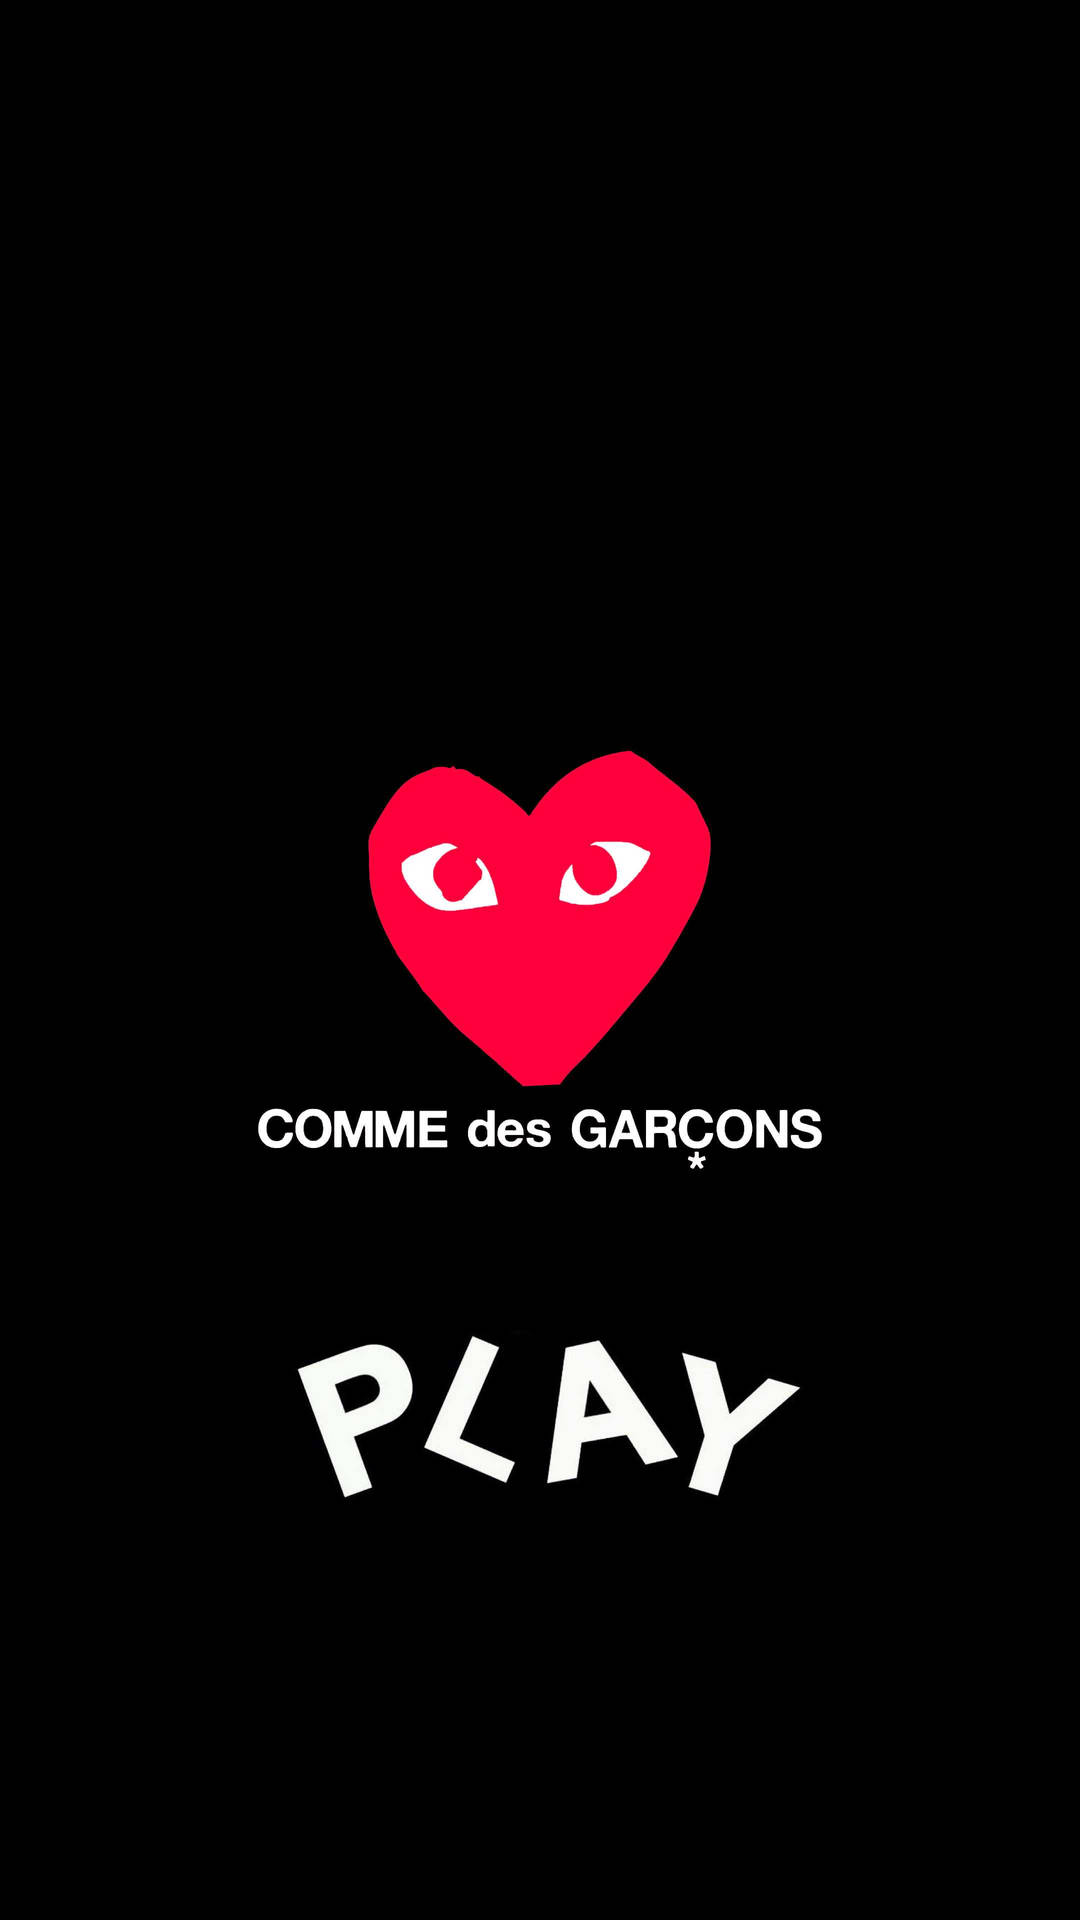 Cdgcomme Des Garcons Play Can Be Translated To Spanish As 